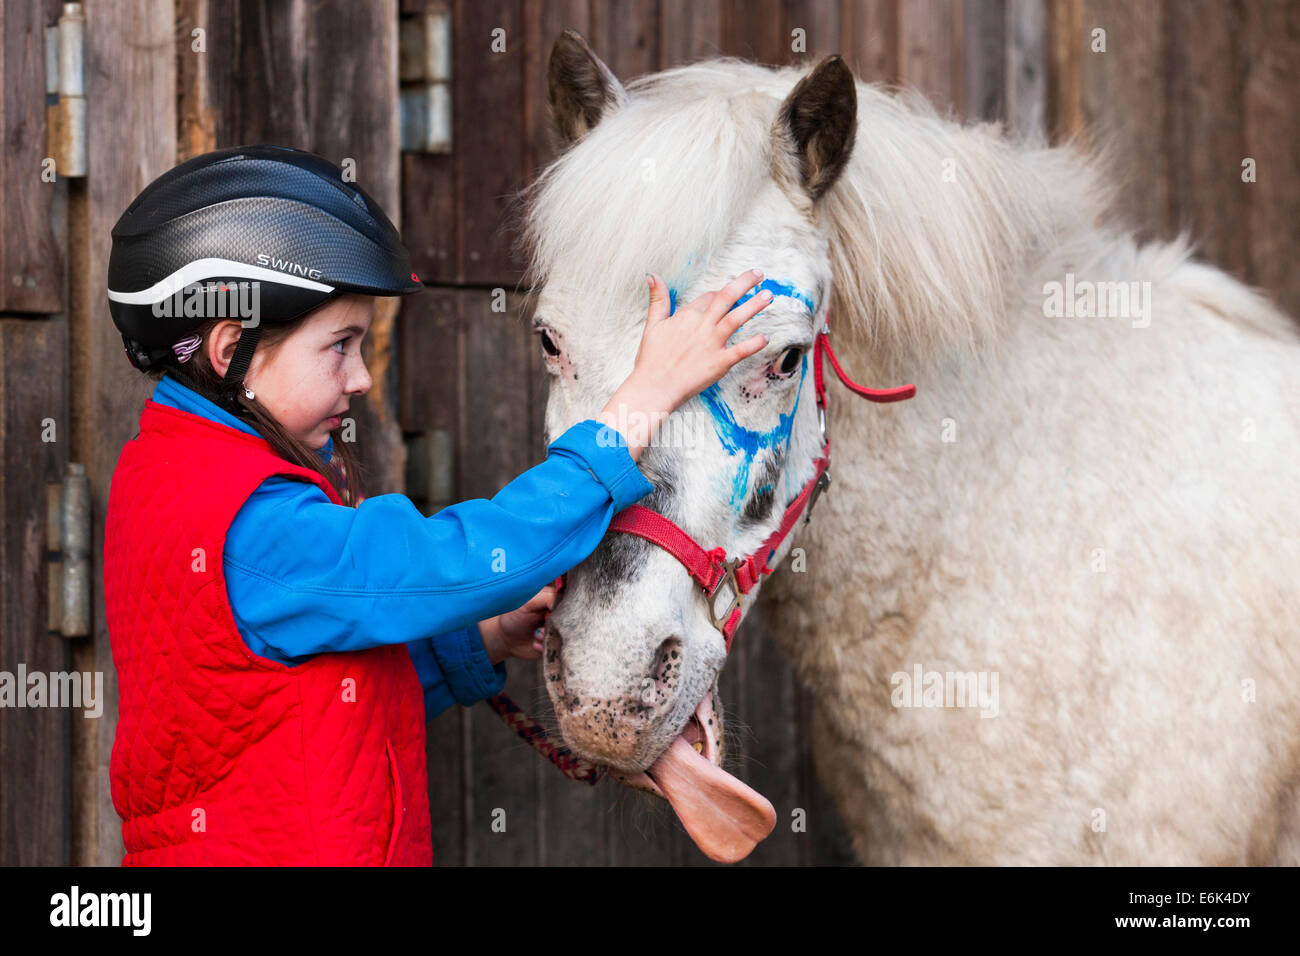 Girl wearing a riding helmet painting a pony with finger paints, pony stretching out its tongue, gray, Tyrol, Austria Stock Photo